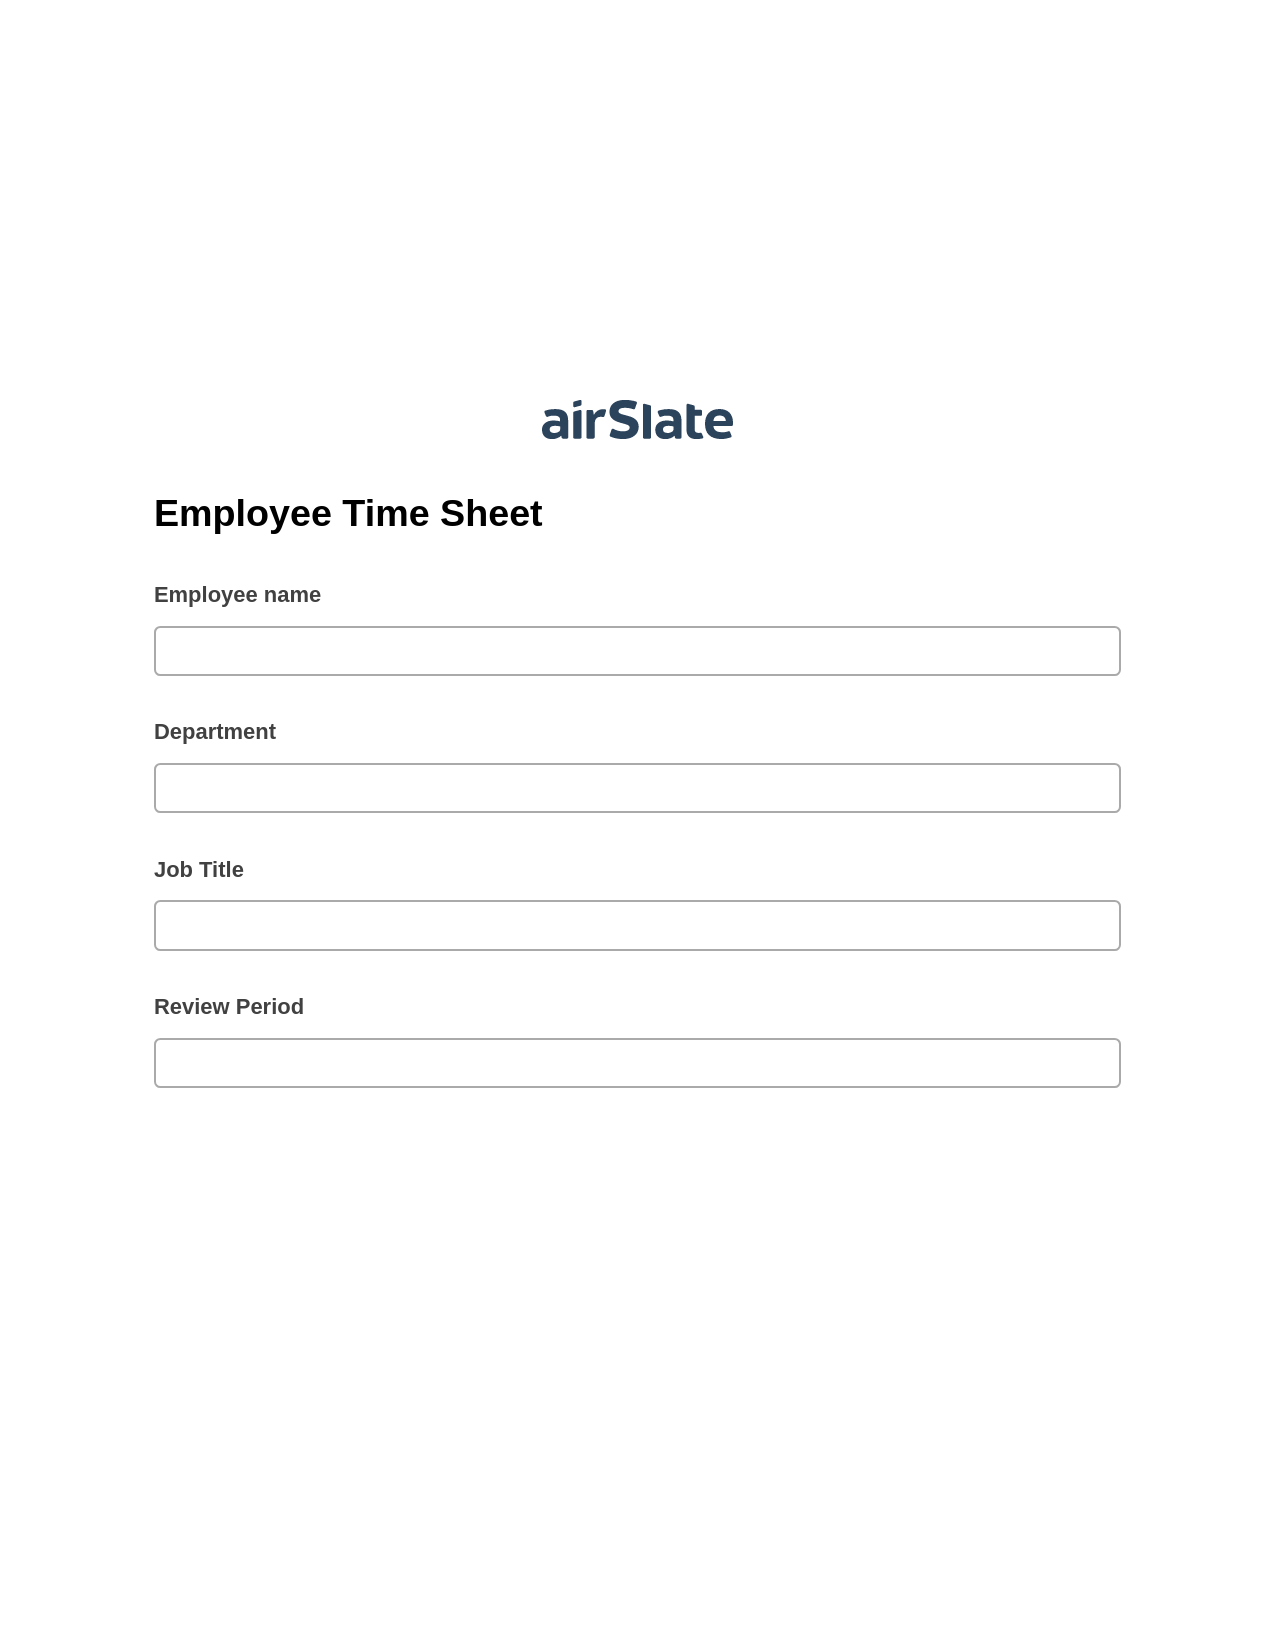 Multirole Employee Time Sheet Pre-fill Dropdowns from Airtable, Invoke Salesforce Process Bot, Export to Google Sheet Bot